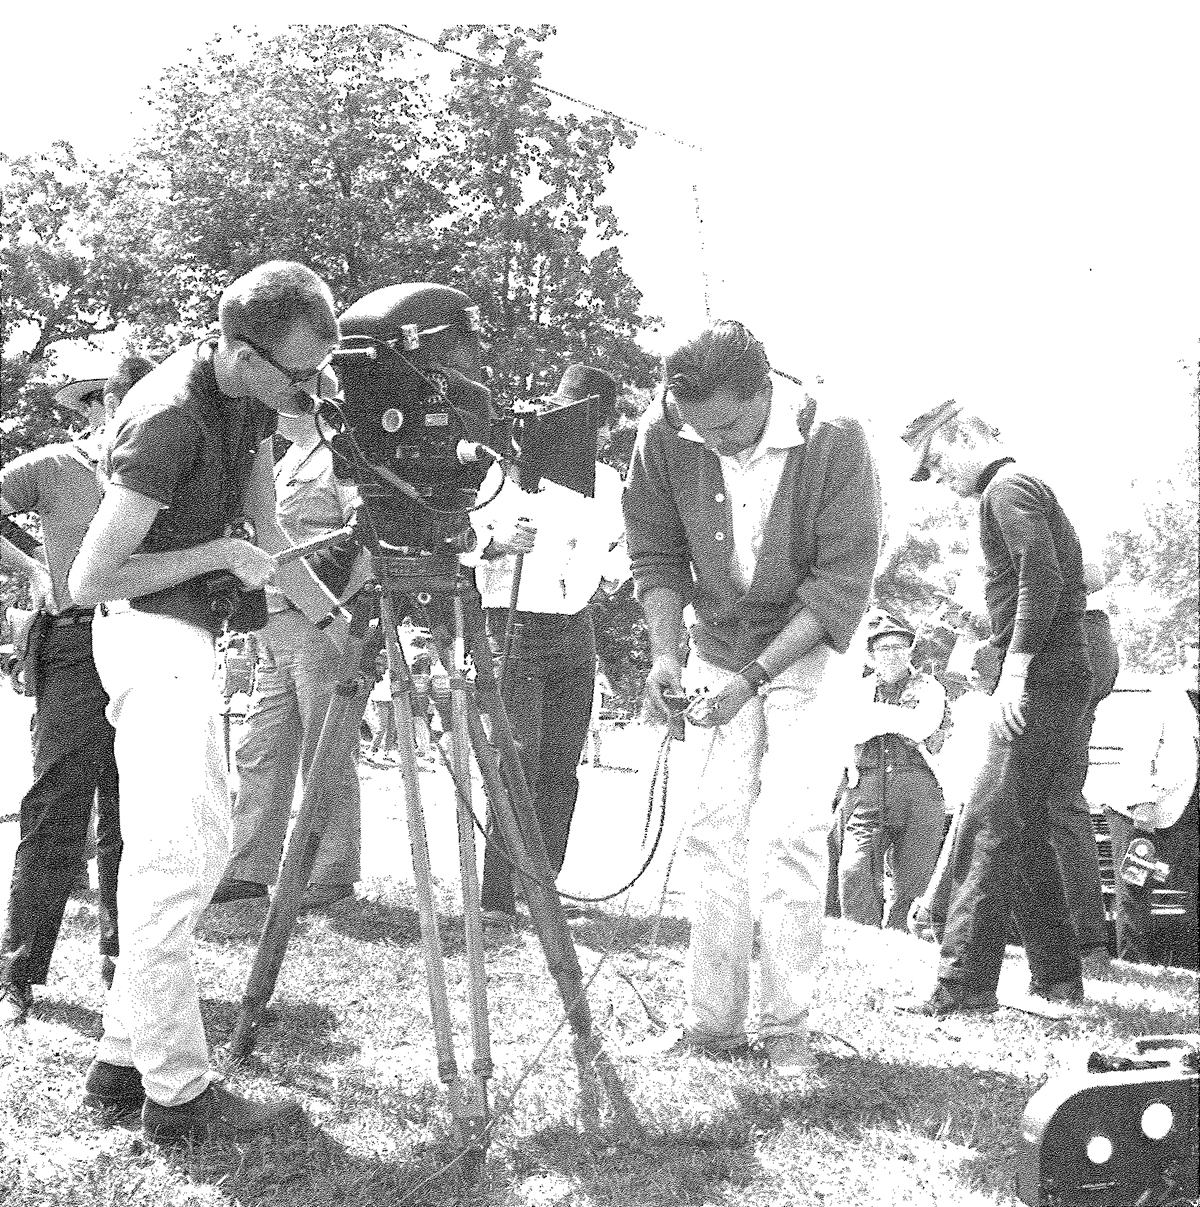 Bill Hinzman and George Romero on a camera set-up during the filming of "Night of the Living Dead." Photo courtesy of John Russo's "The Complete Night of the Living Dead Filmbook."